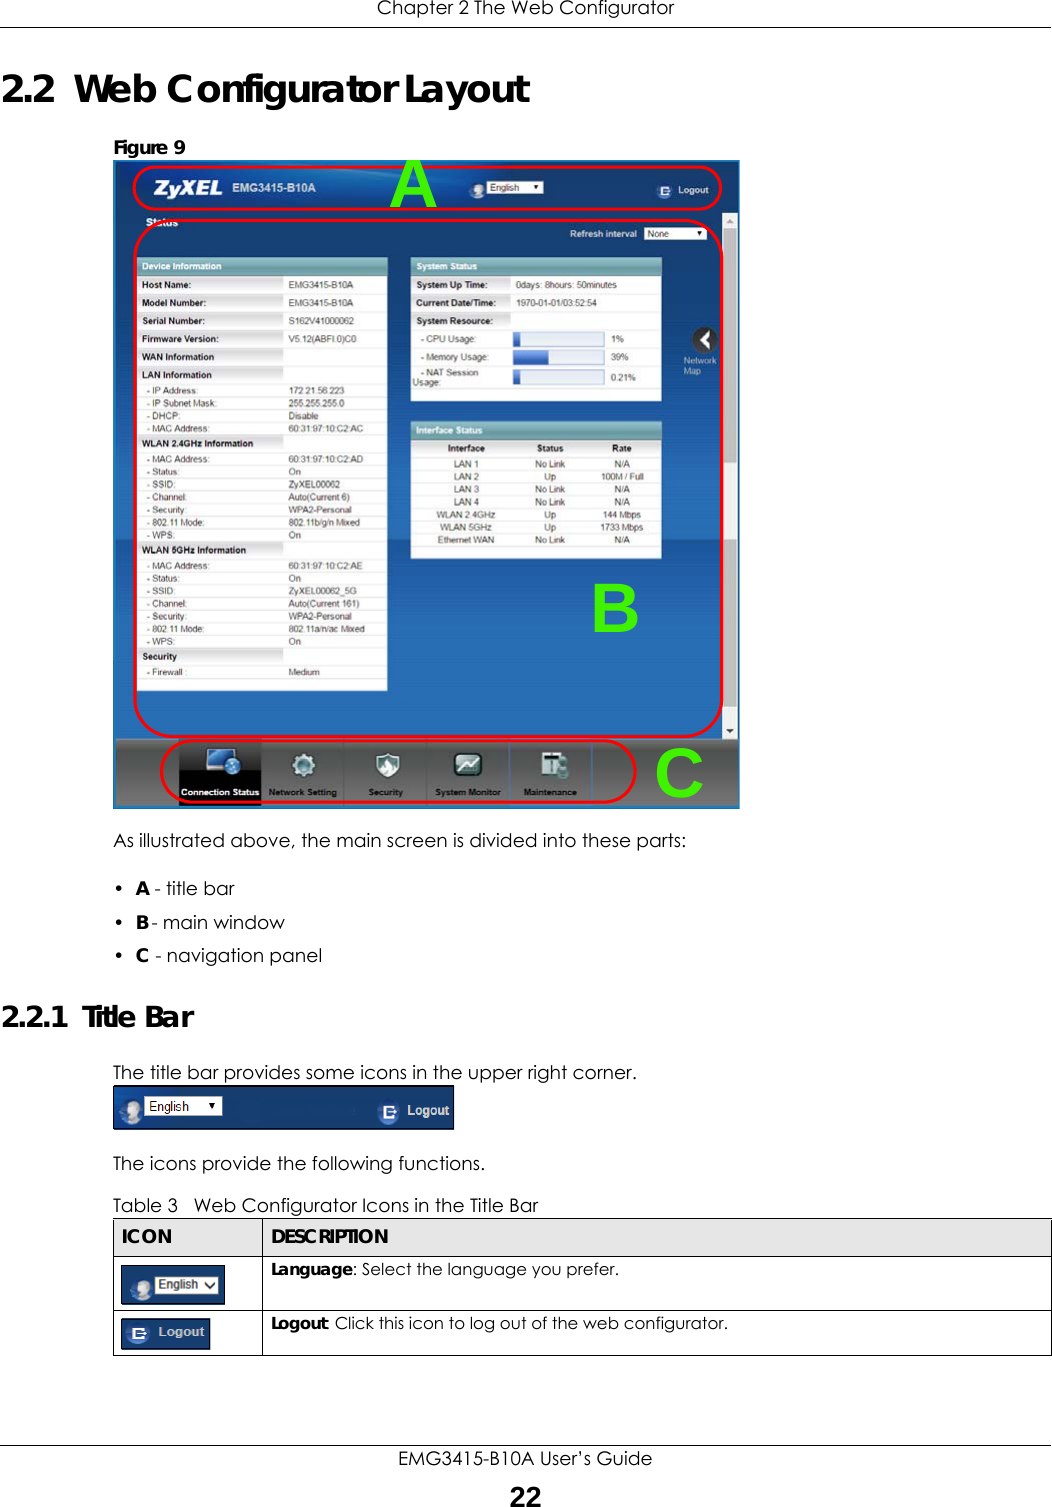 Chapter 2 The Web ConfiguratorEMG3415-B10A User’s Guide222.2  Web Configurator LayoutFigure 9   As illustrated above, the main screen is divided into these parts:•A - title bar•B - main window •C - navigation panel2.2.1  Title BarThe title bar provides some icons in the upper right corner.The icons provide the following functions.ABCTable 3   Web Configurator Icons in the Title BarICON  DESCRIPTIONLanguage: Select the language you prefer.Logout: Click this icon to log out of the web configurator.